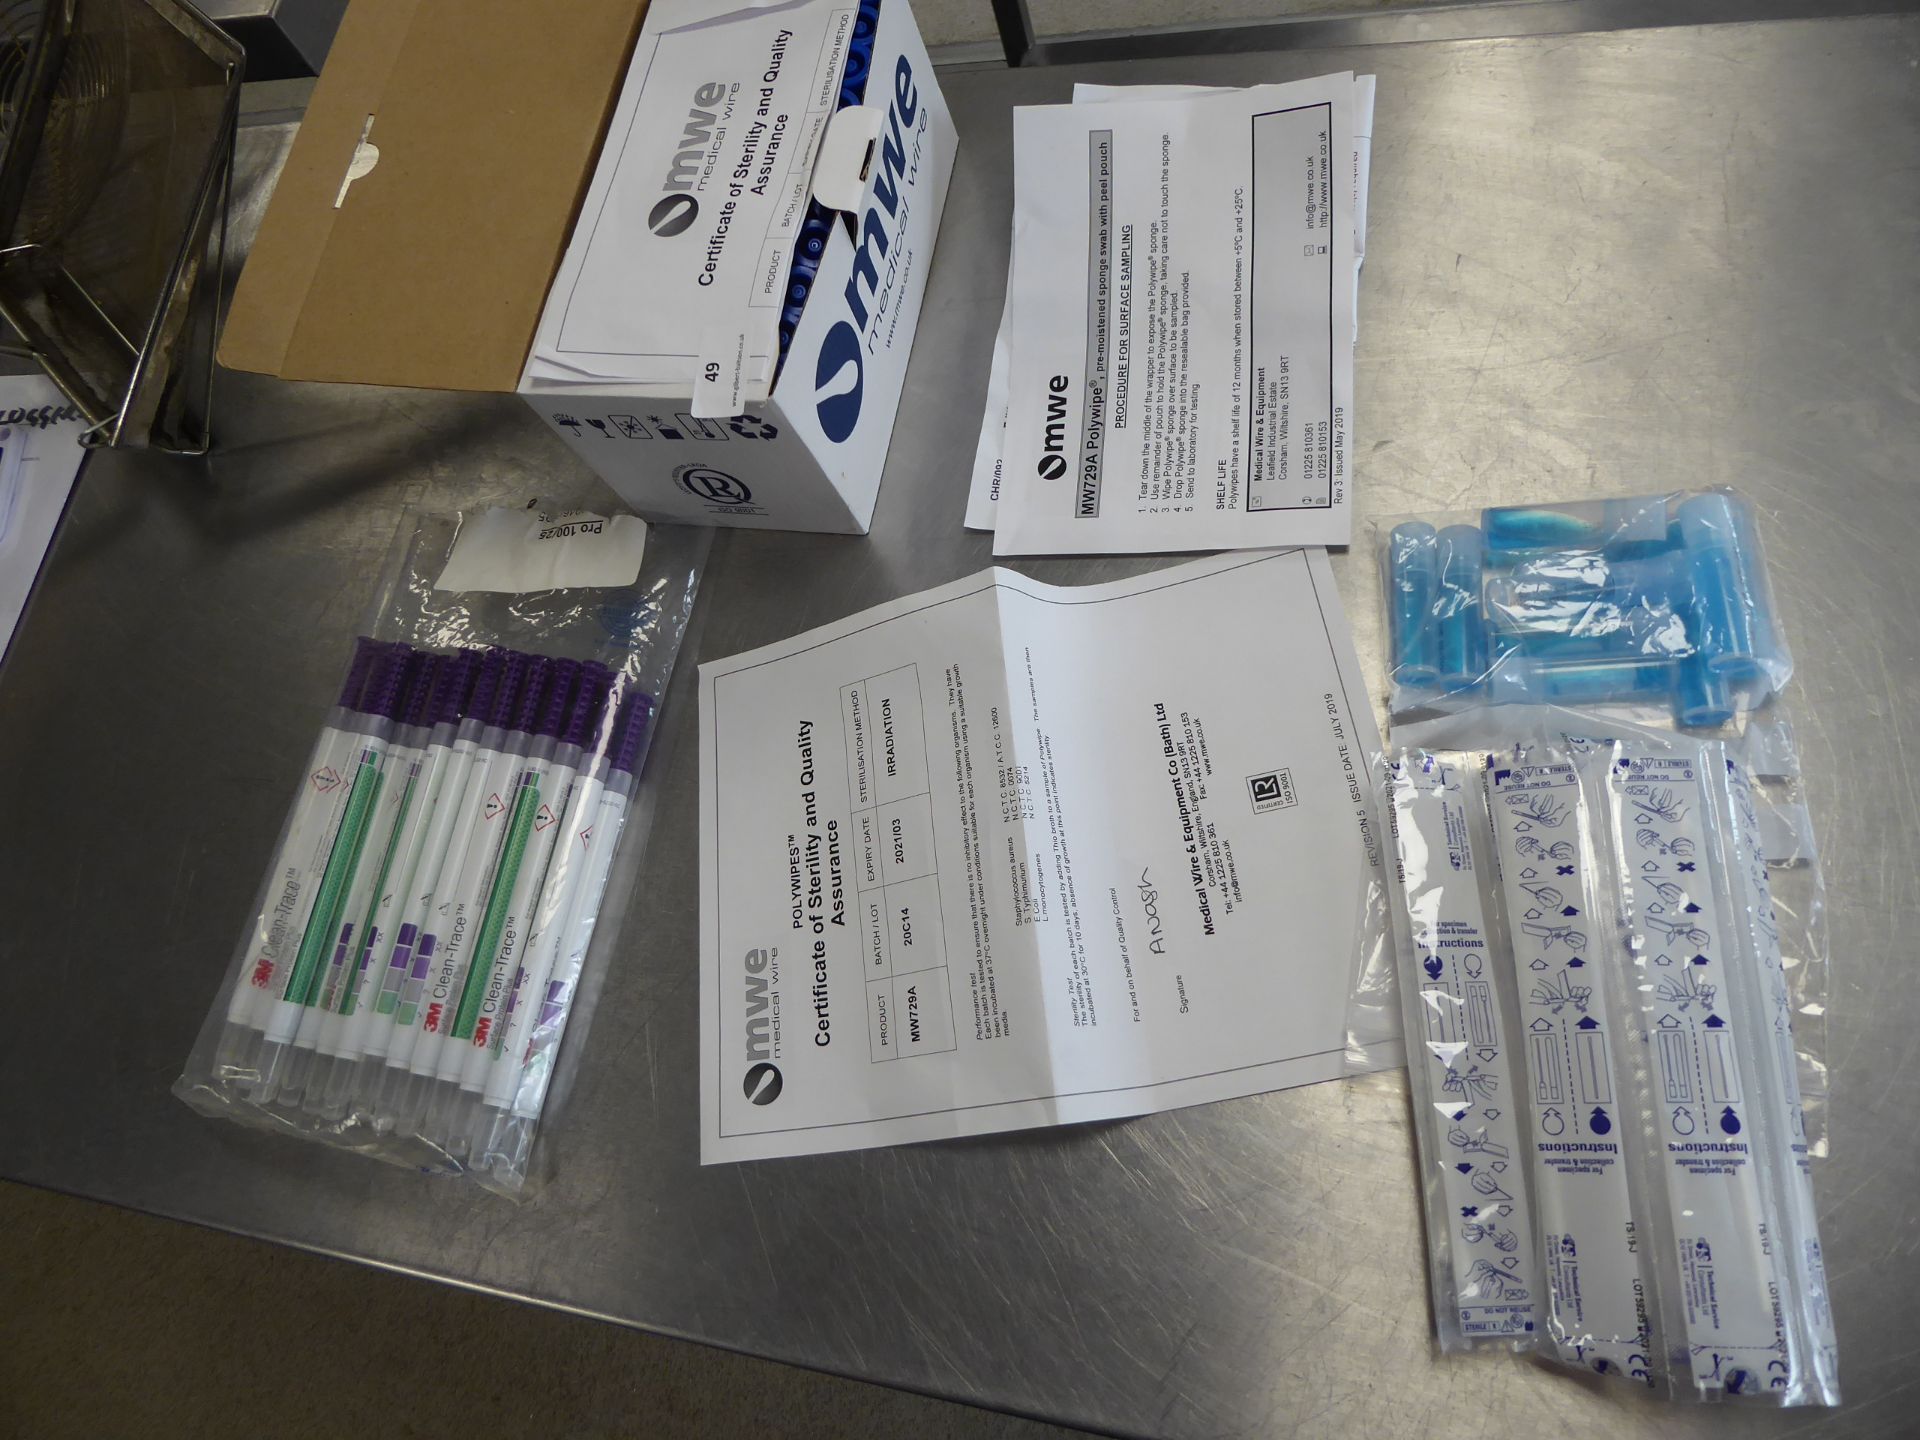 * collection of medical swabs and test kits - for testing food borne bacteria